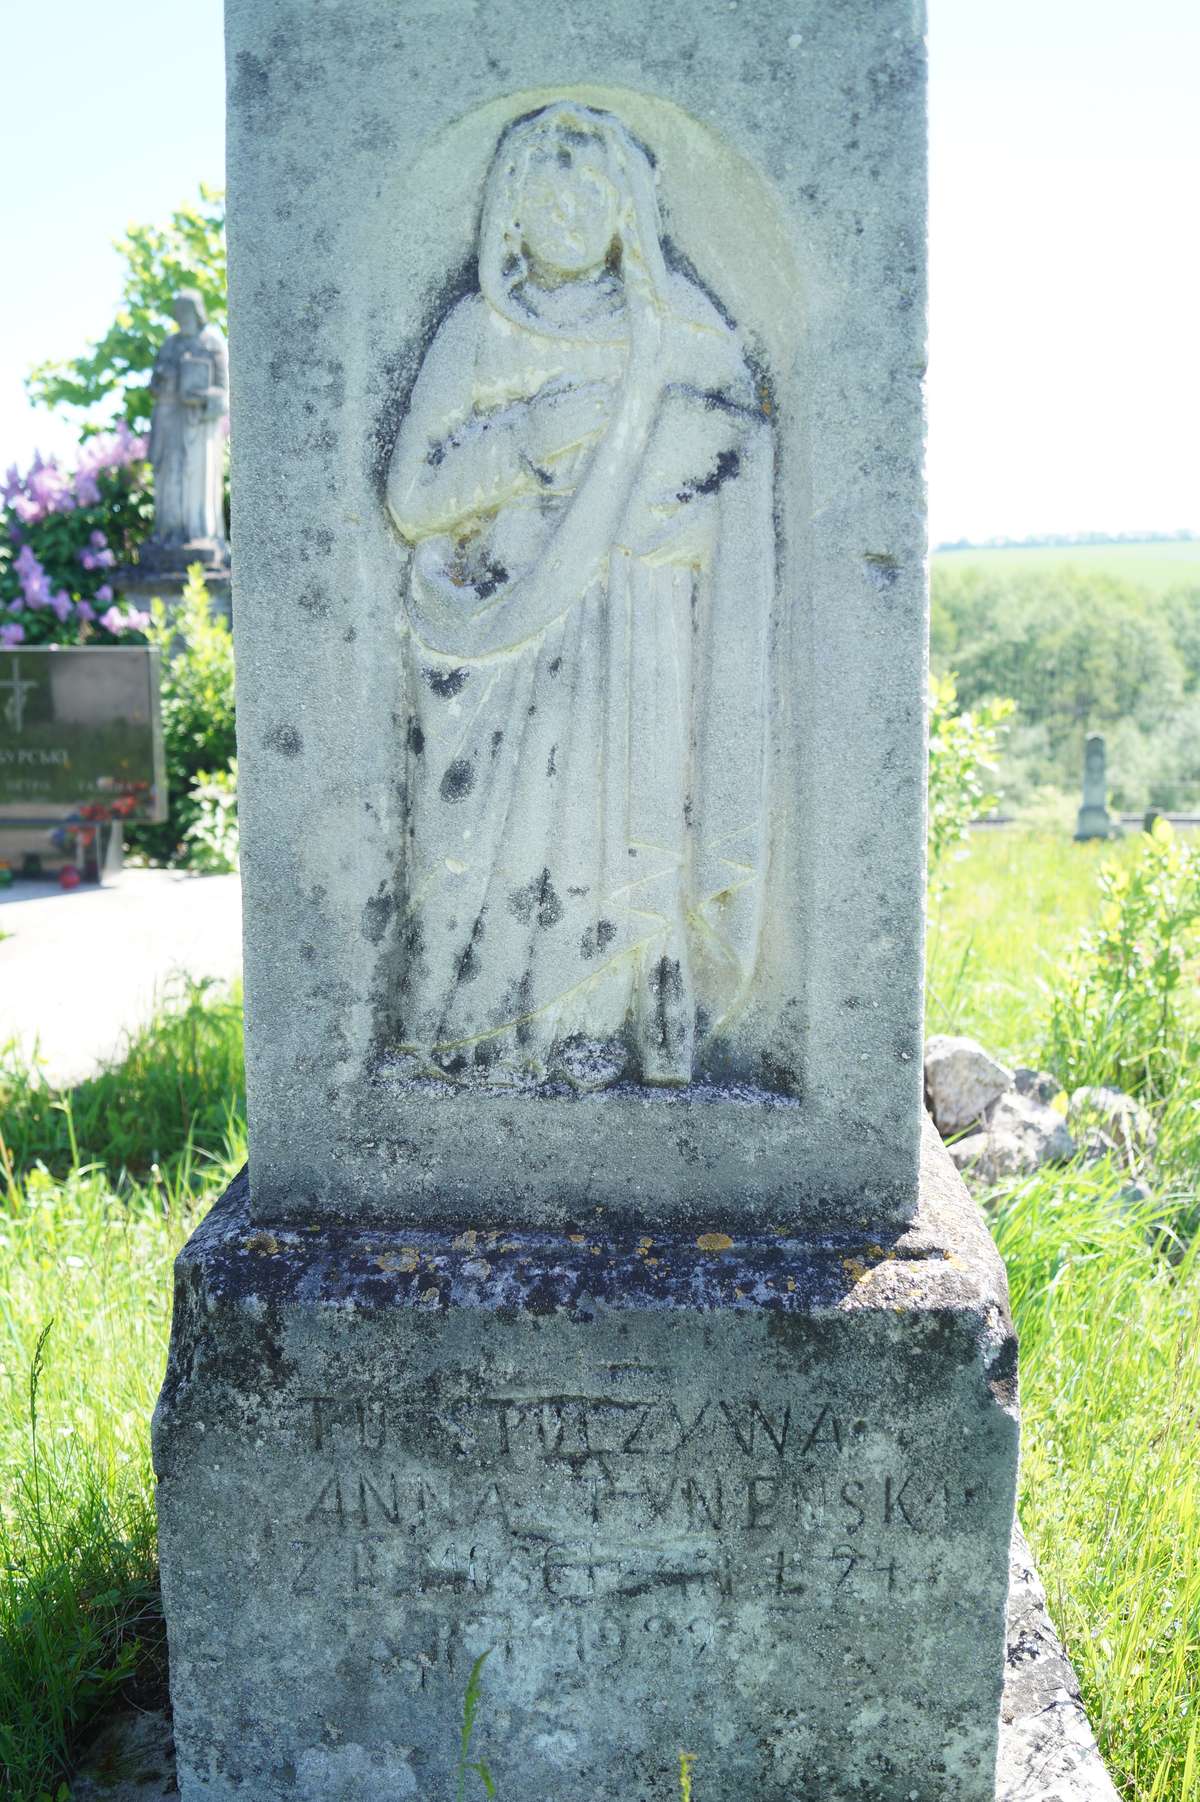 Bas-relief and inscription from the tombstone of Anna Tyneńska, cemetery in Łozowa